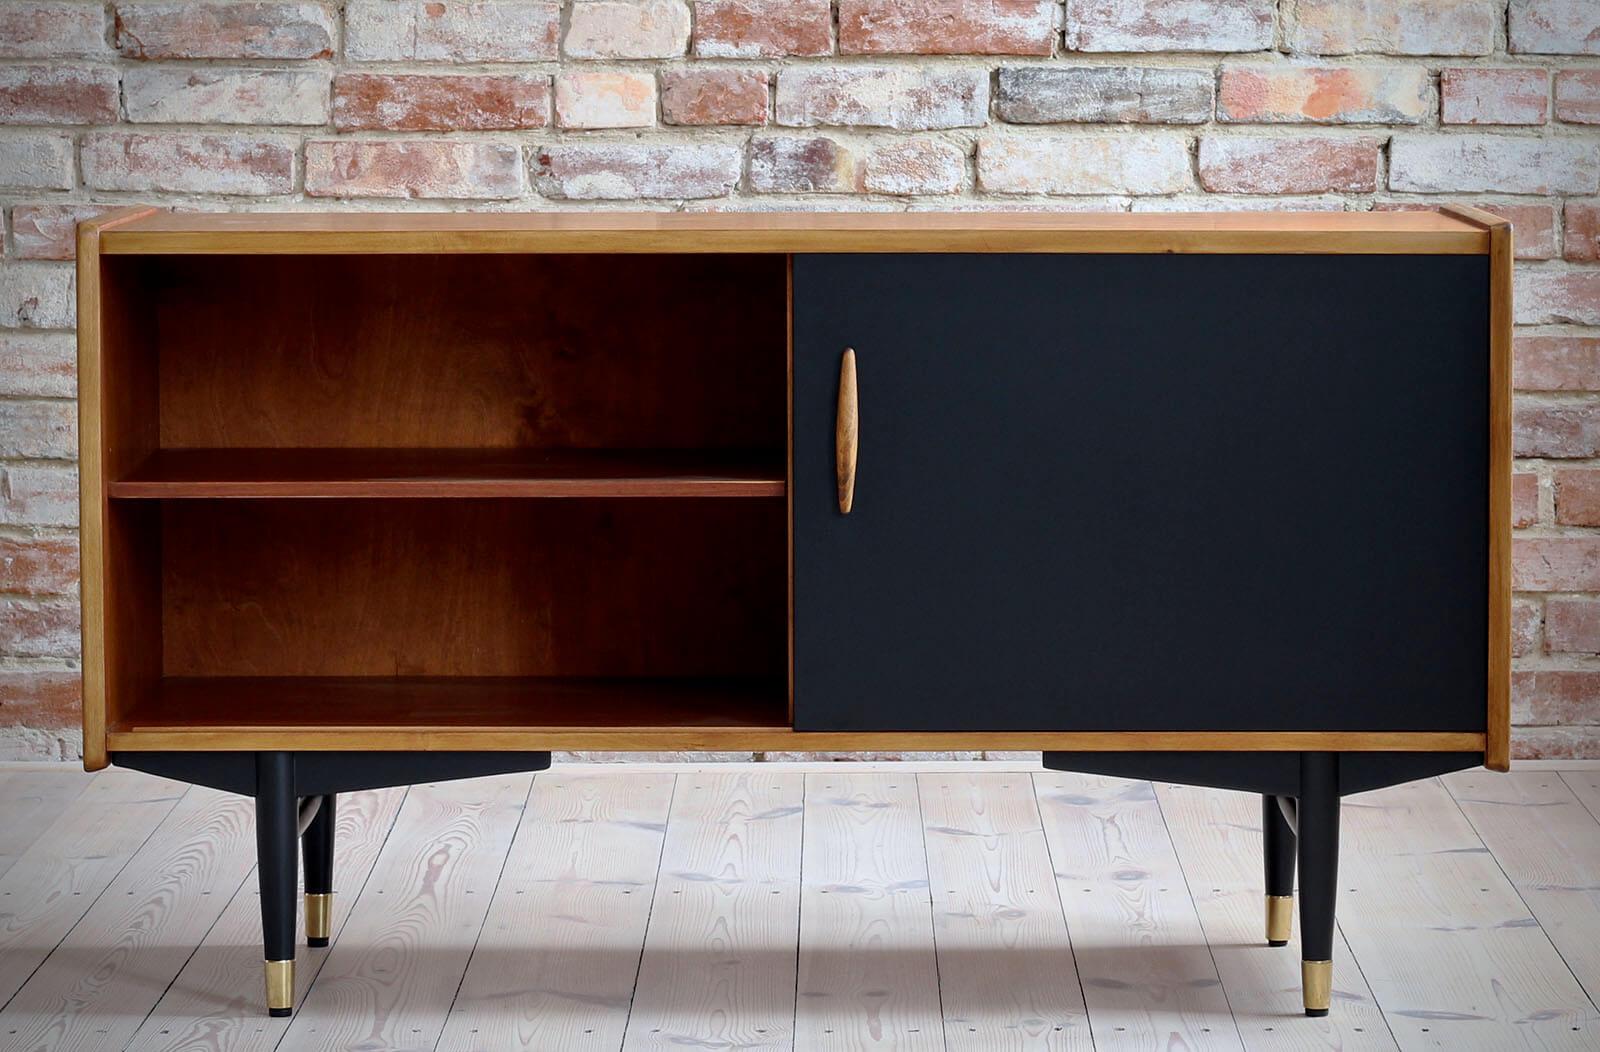 This is not so common model of sideboard by Nils Jonsson in teak wood with black sliding door, a sculpted handle, elegant black base completed with subtle brass legs cups - a great example of Scandinavian Modern style in its best. The piece was